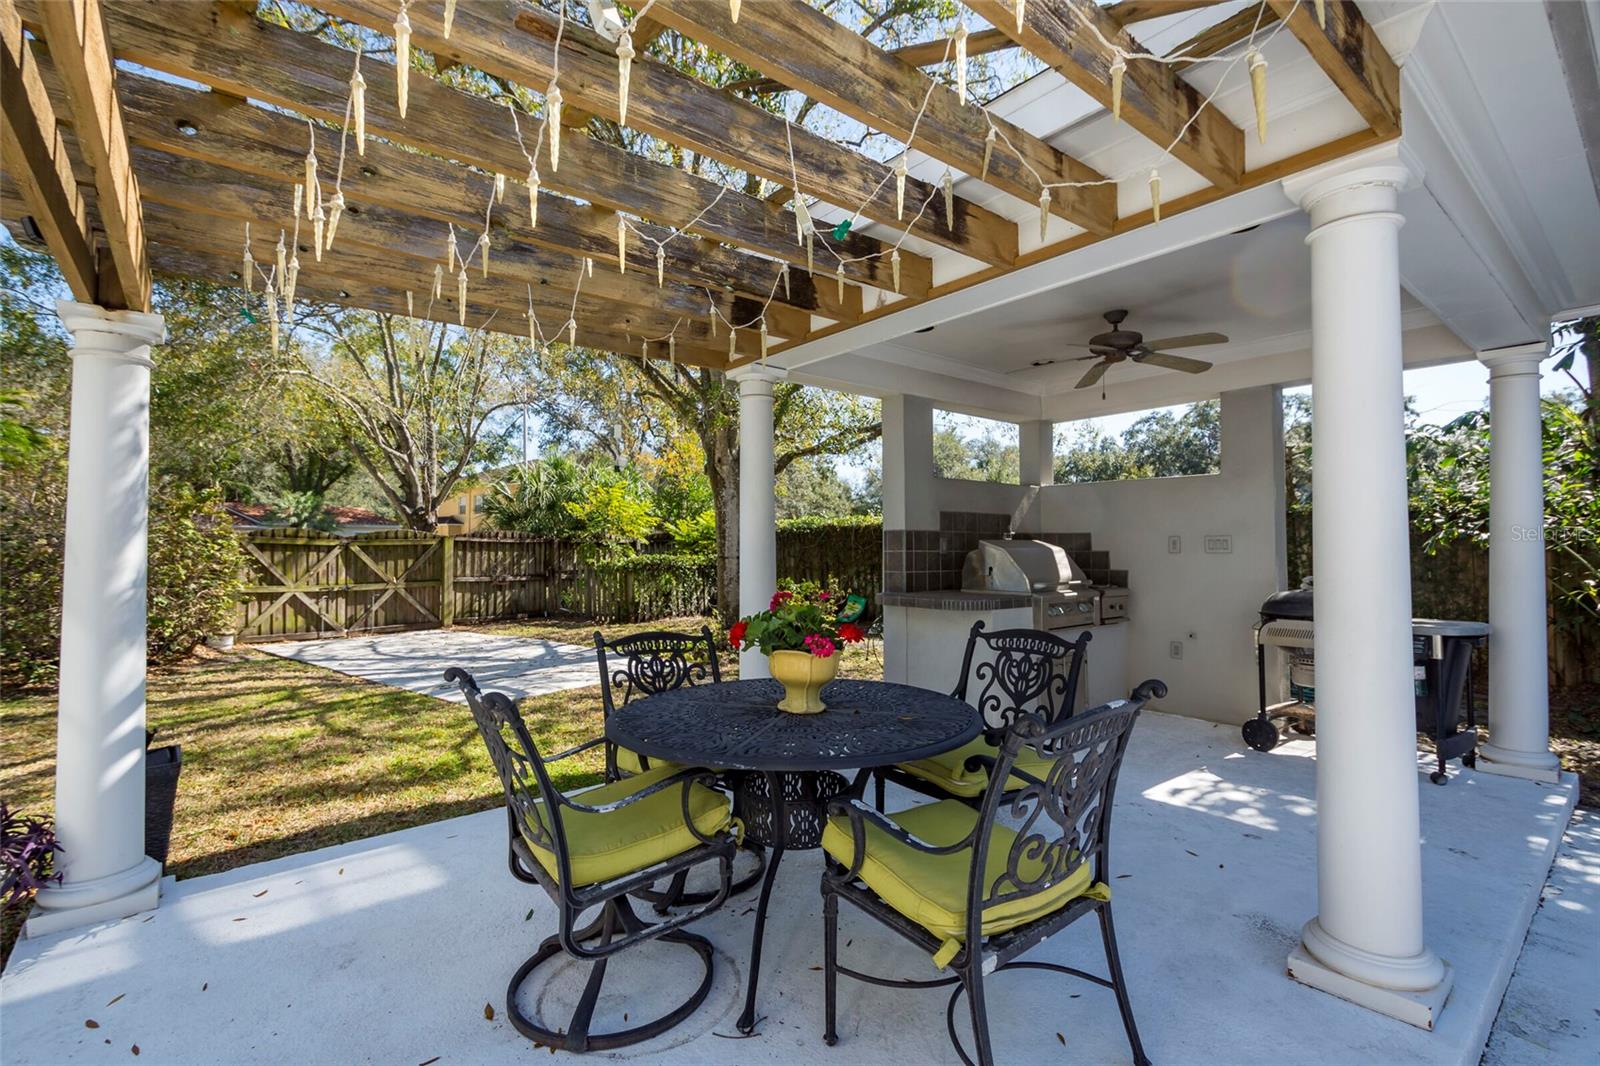 Outside Dining with Covered Grill Area